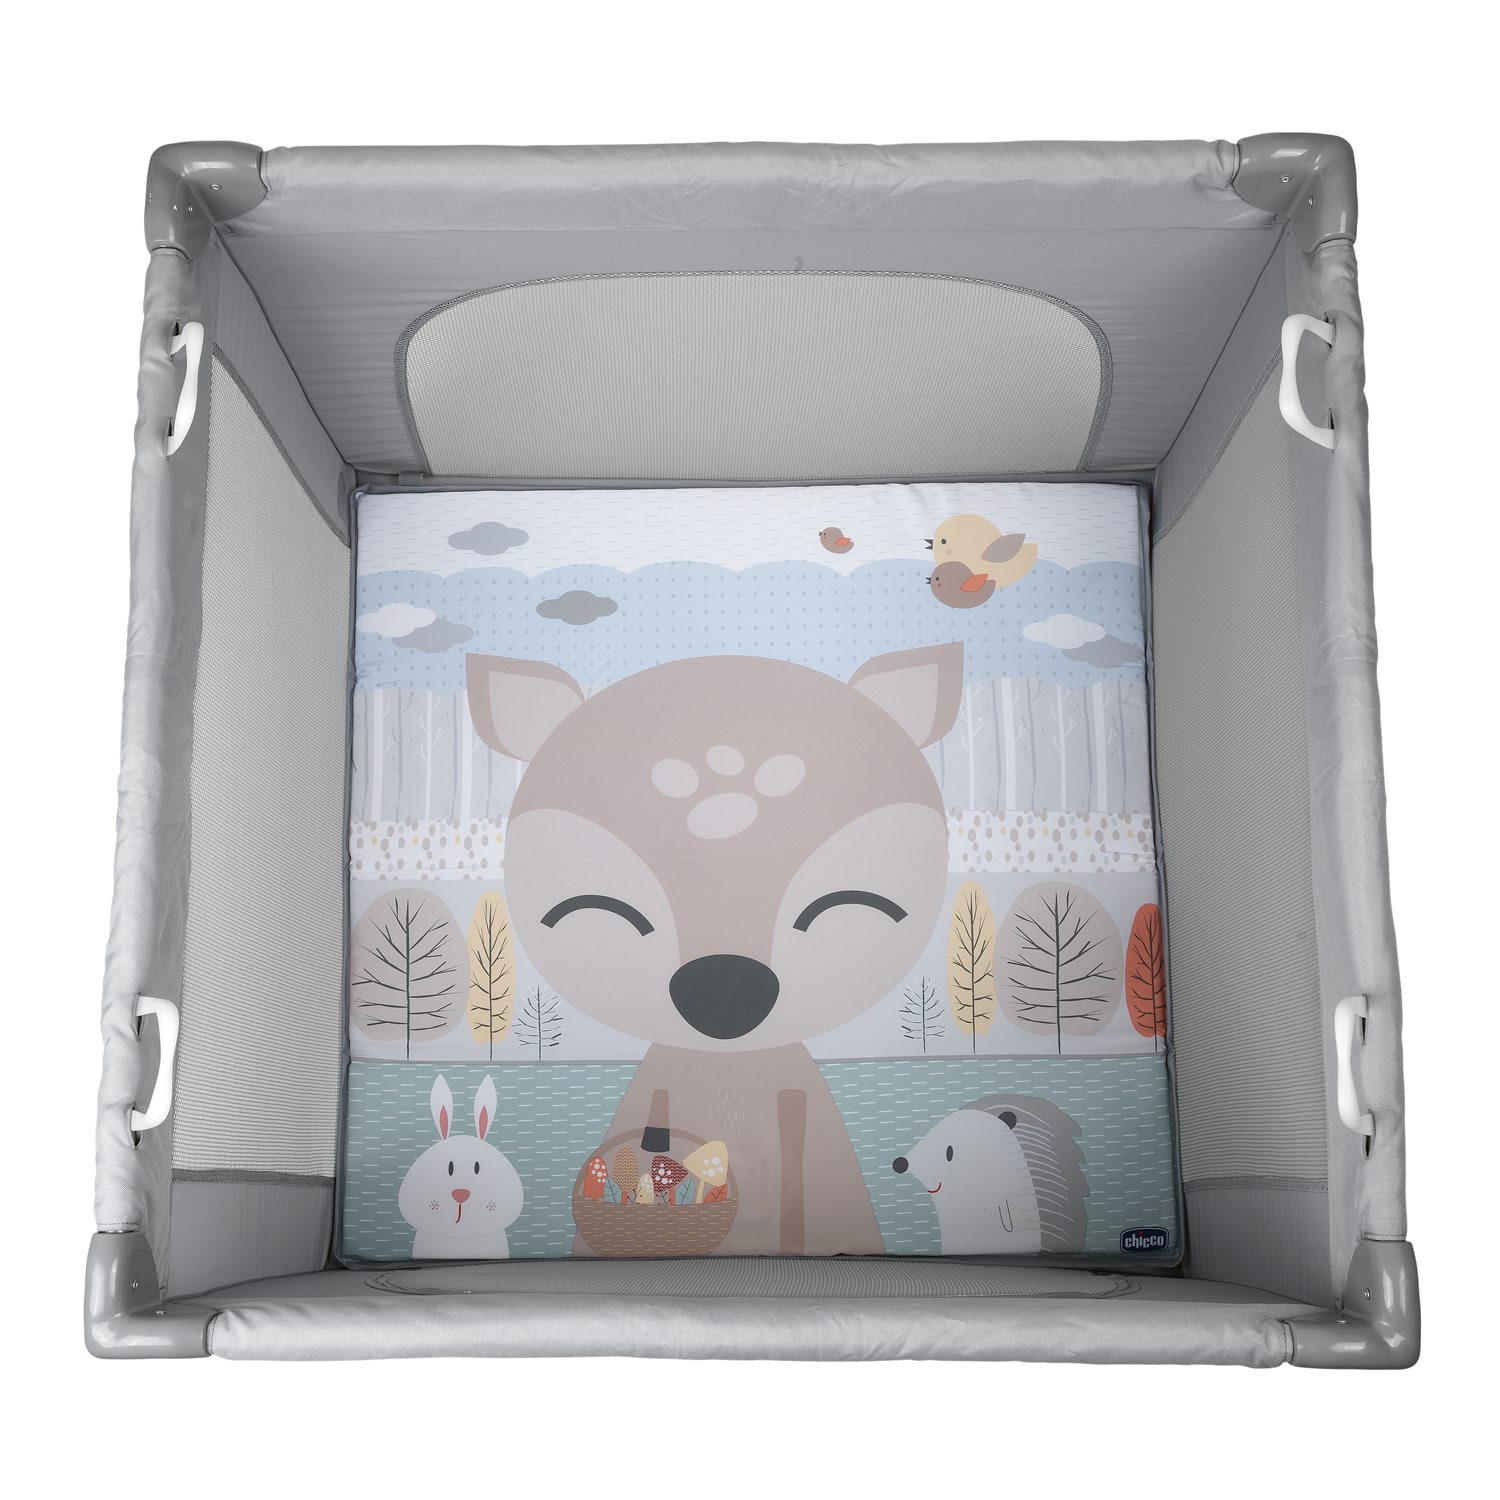 Chicco open box - fawn - Chicco